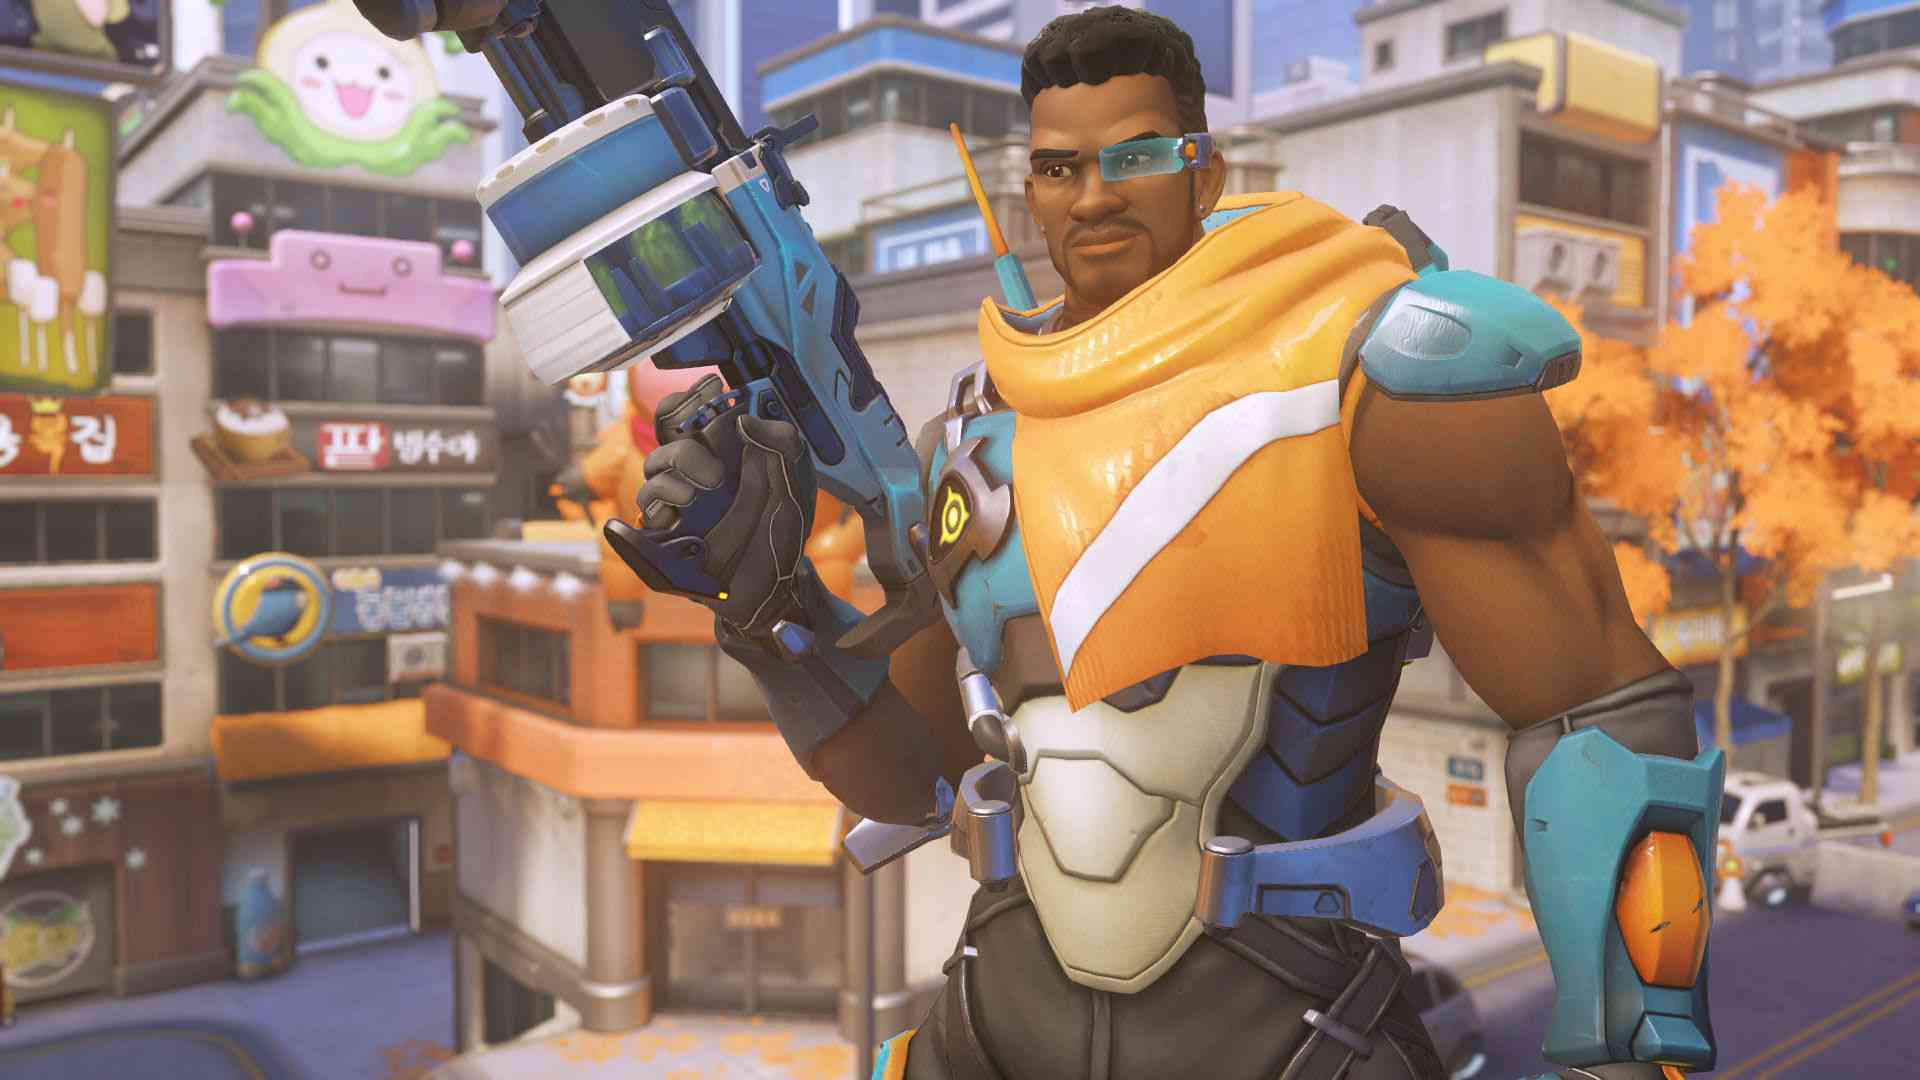 blizzard announced when baptiste will be playable in overwatch 1889 big 1